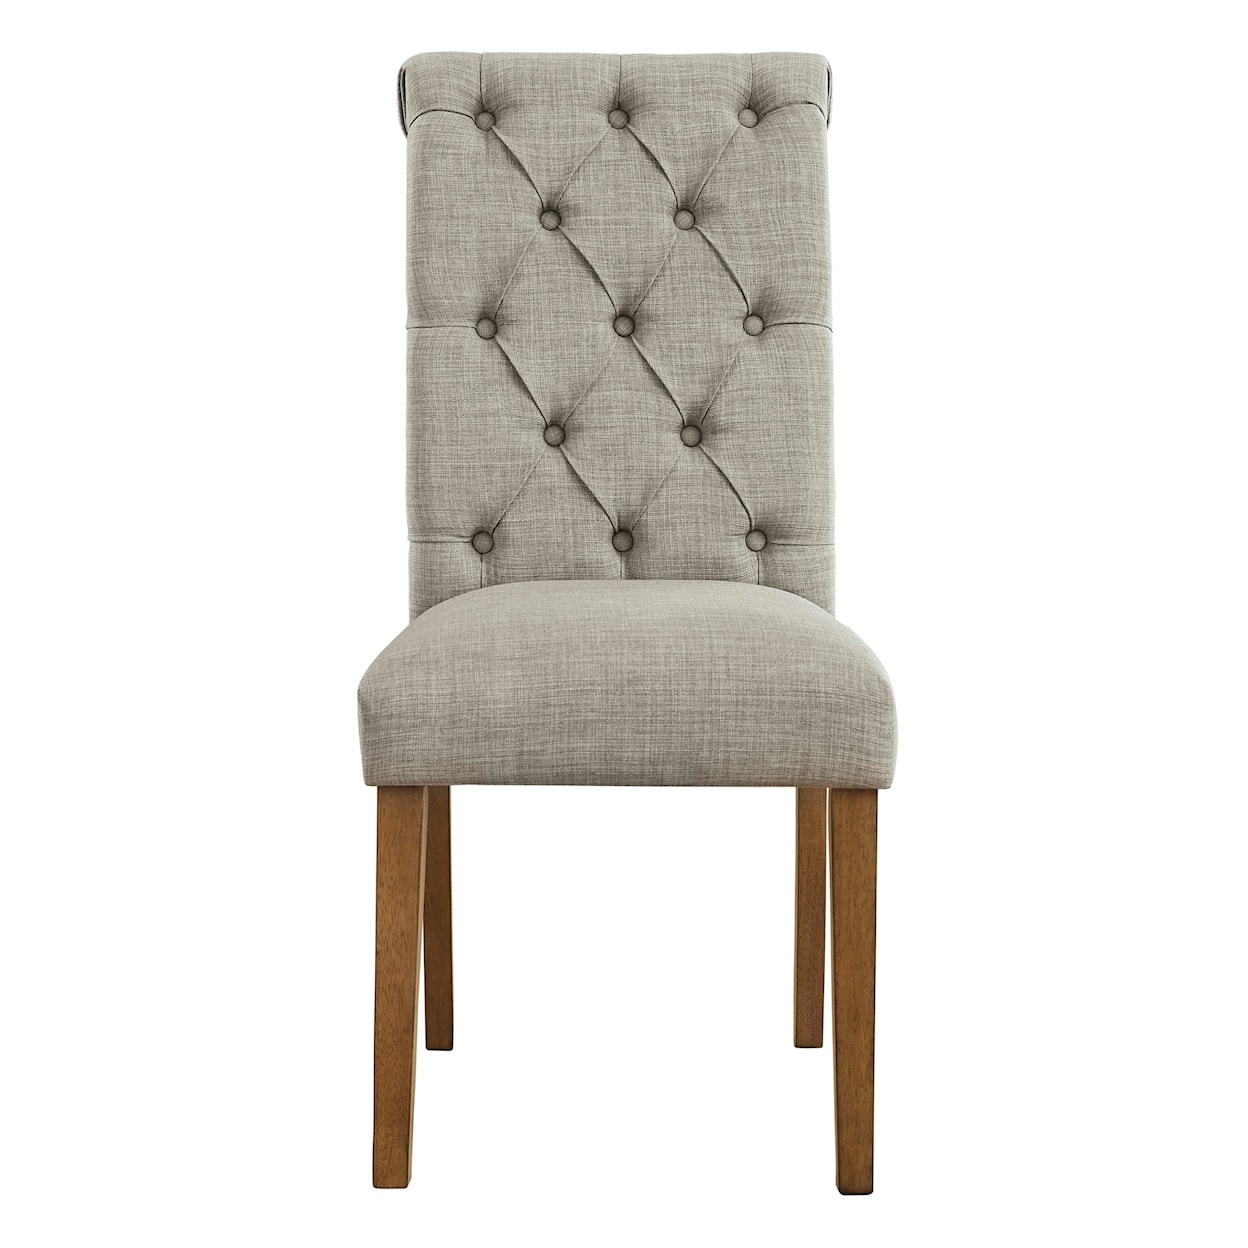 Benchcraft Harvina Dining Chair